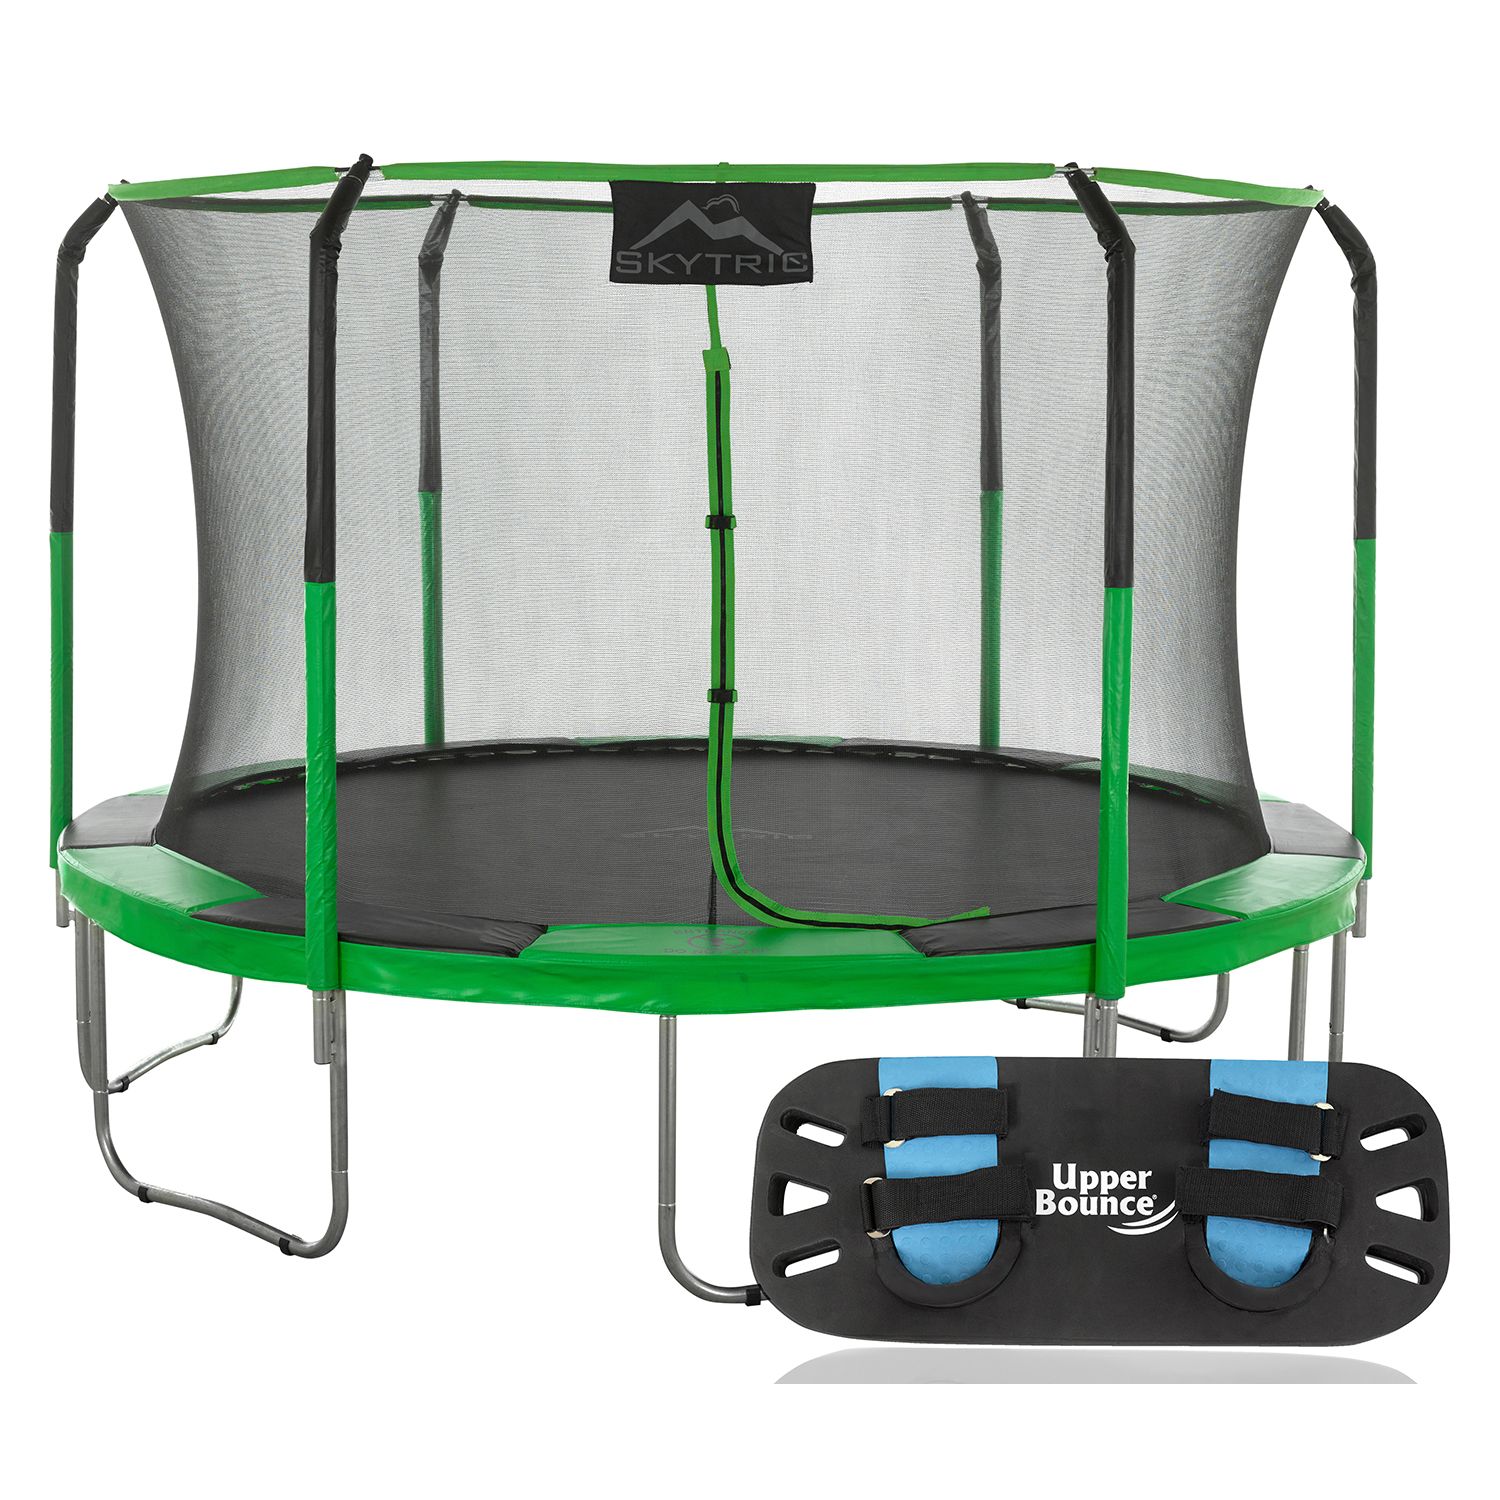 Skytric 11′ Round Trampoline with Trampoline Jumping Skate